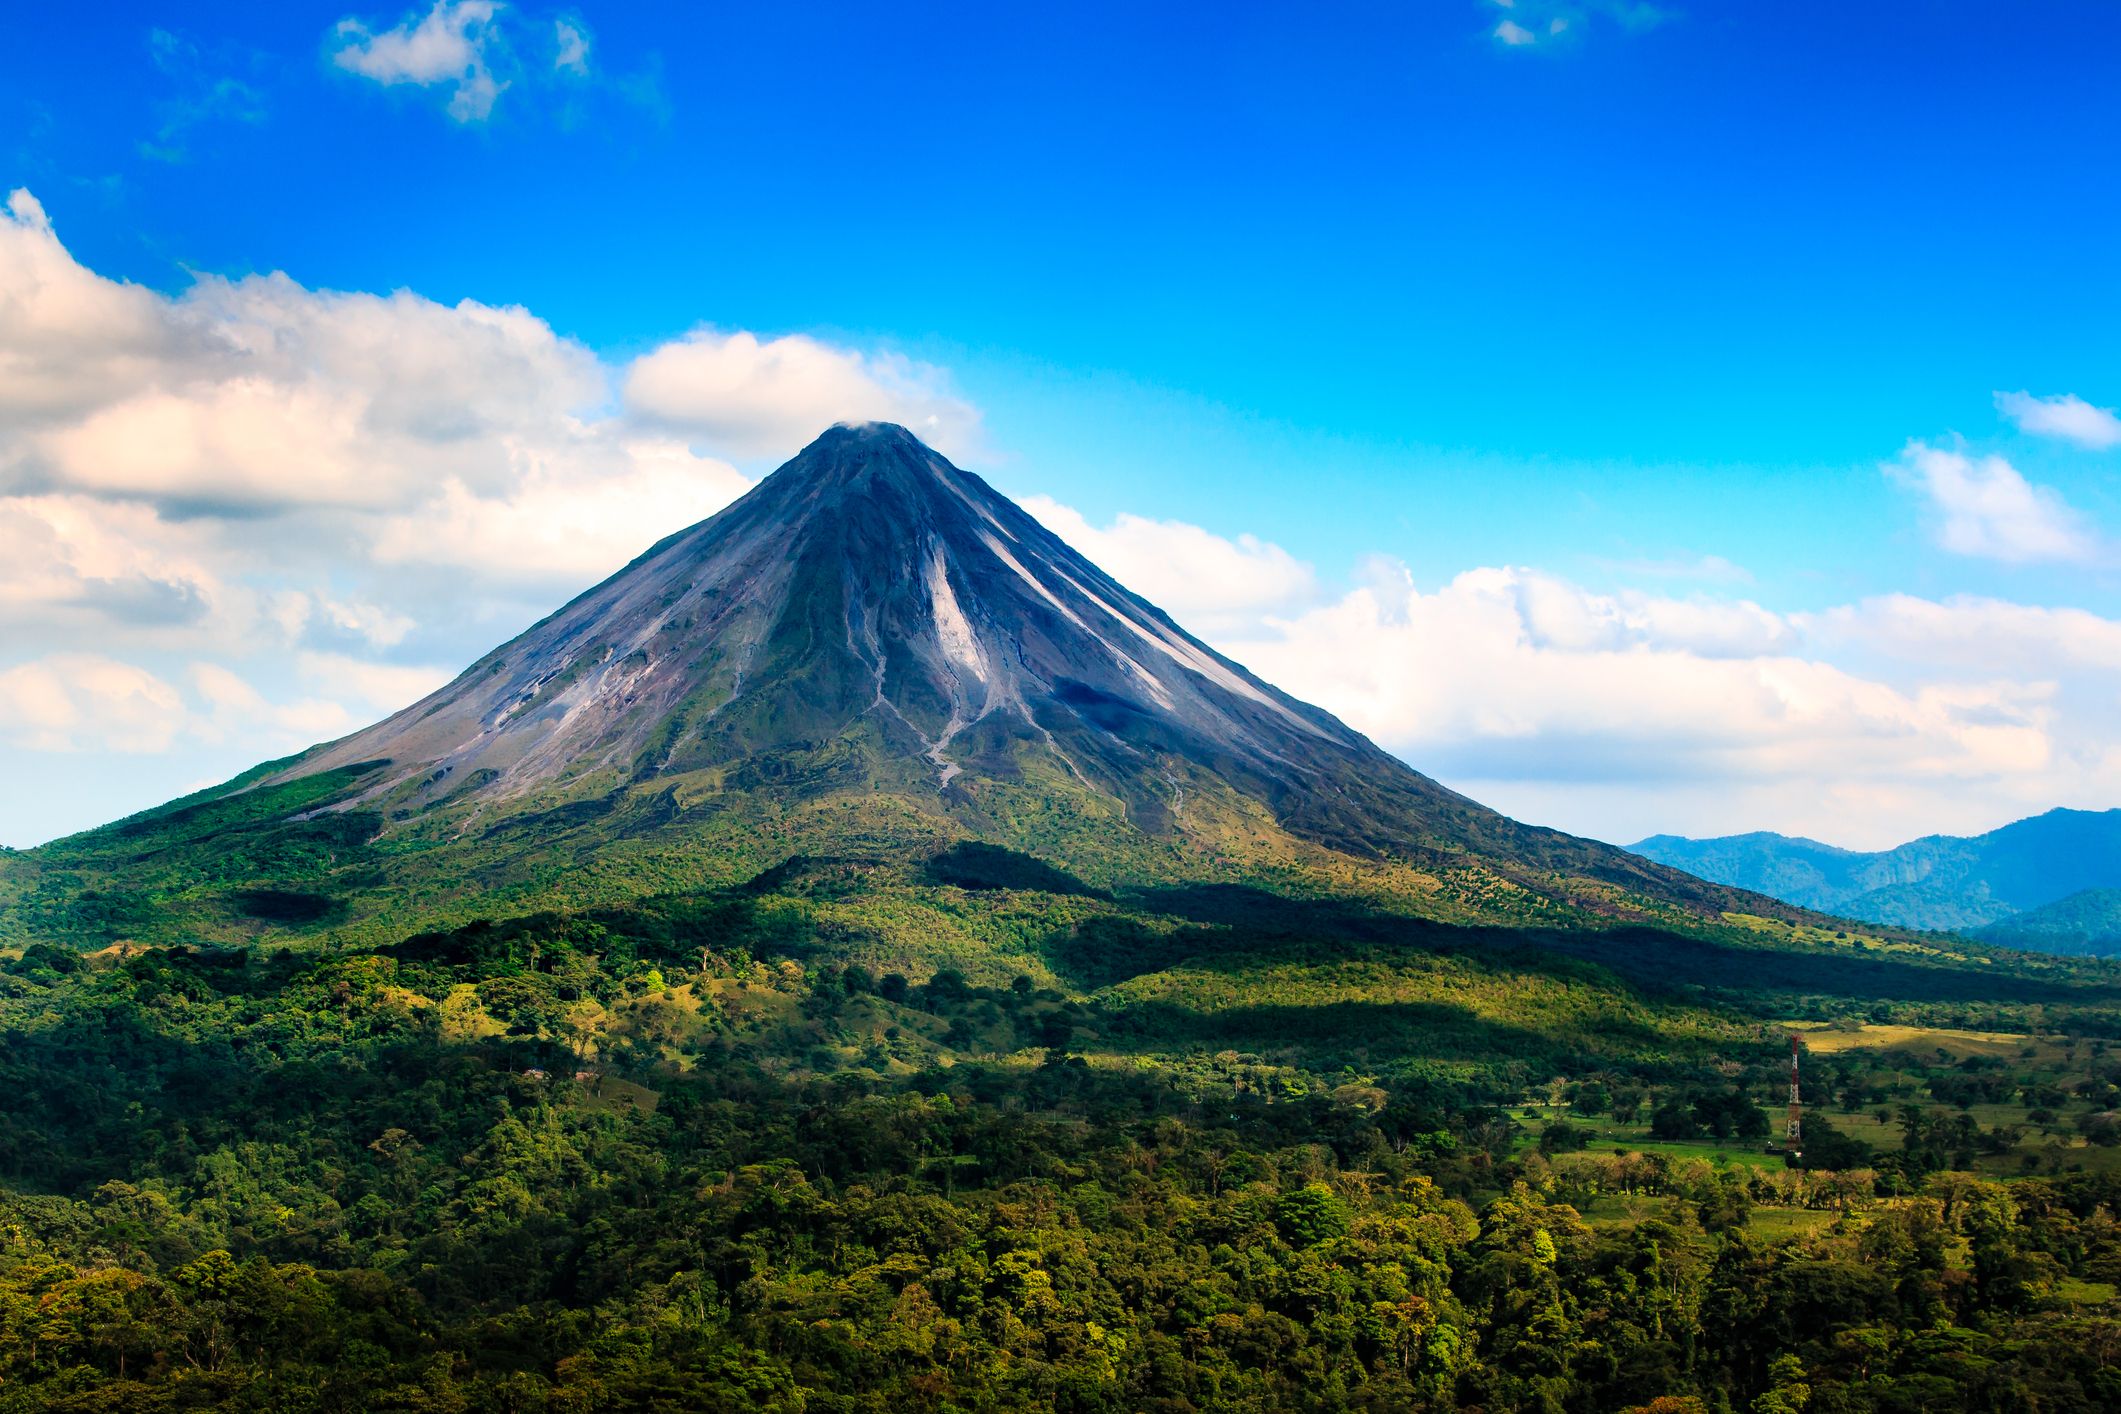 An image of Arenal Volcano, Costa Rica